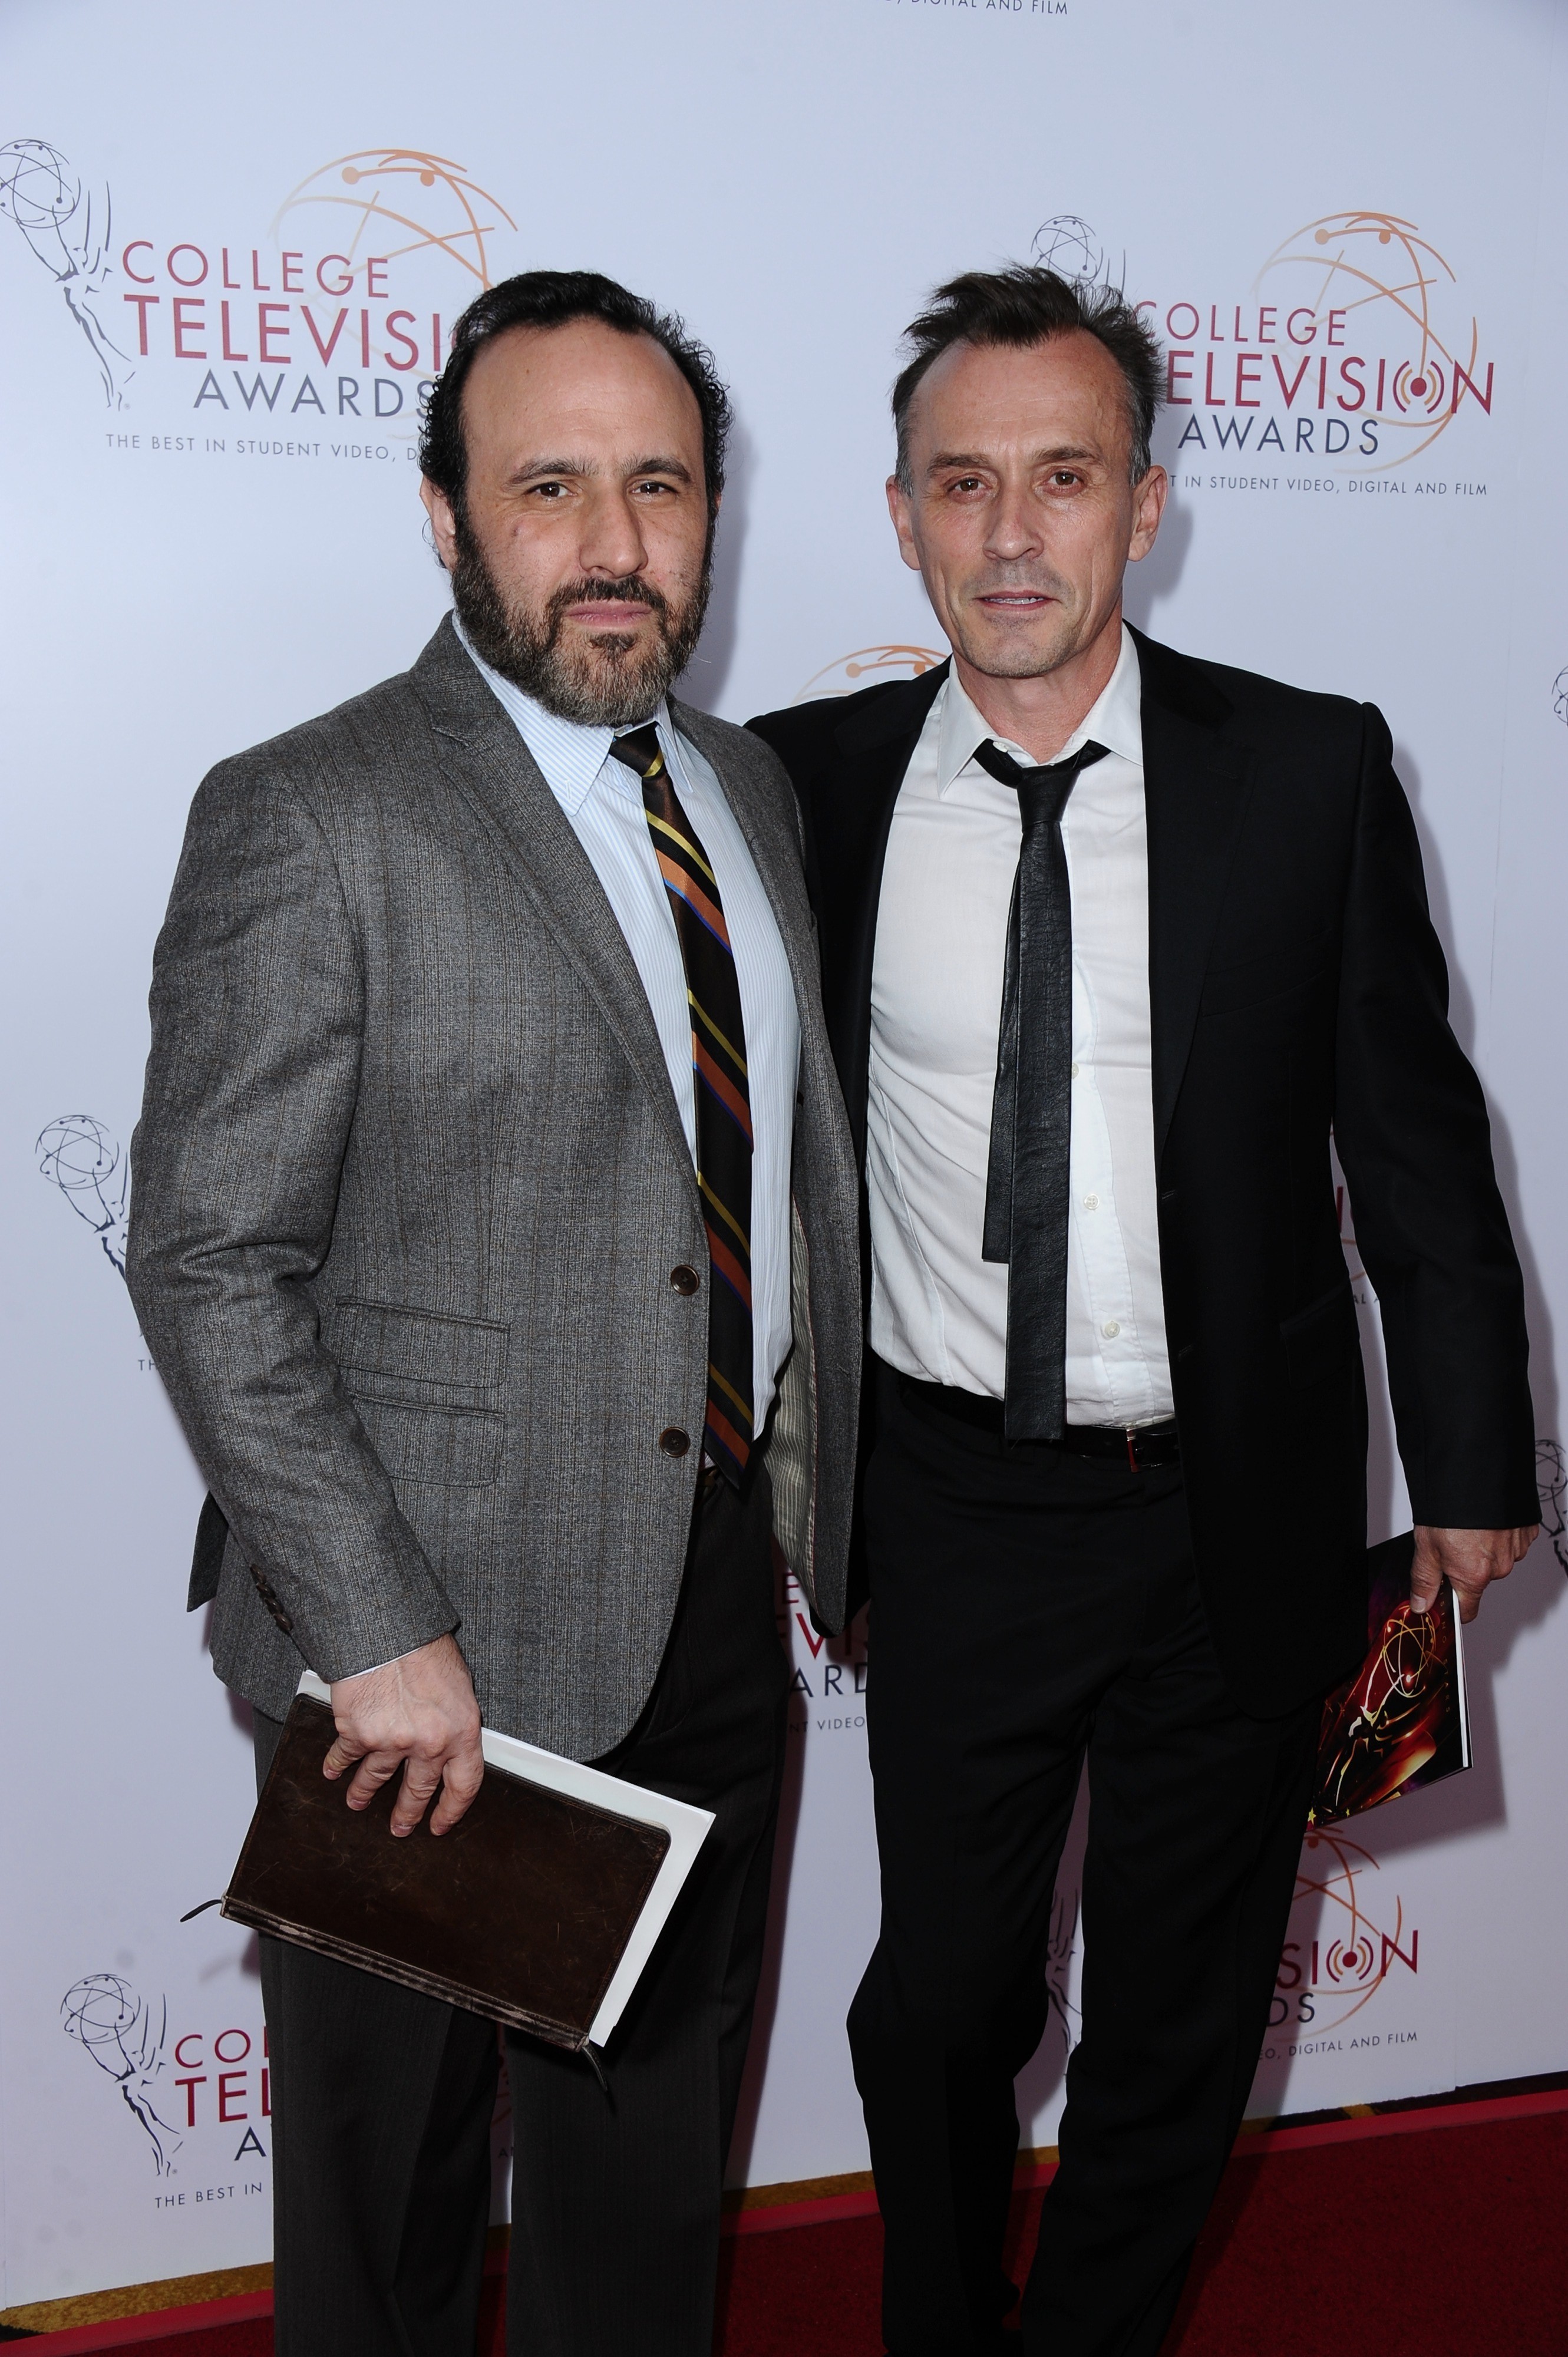 Jason Ensler and Robert Knepper at the College Television Awards